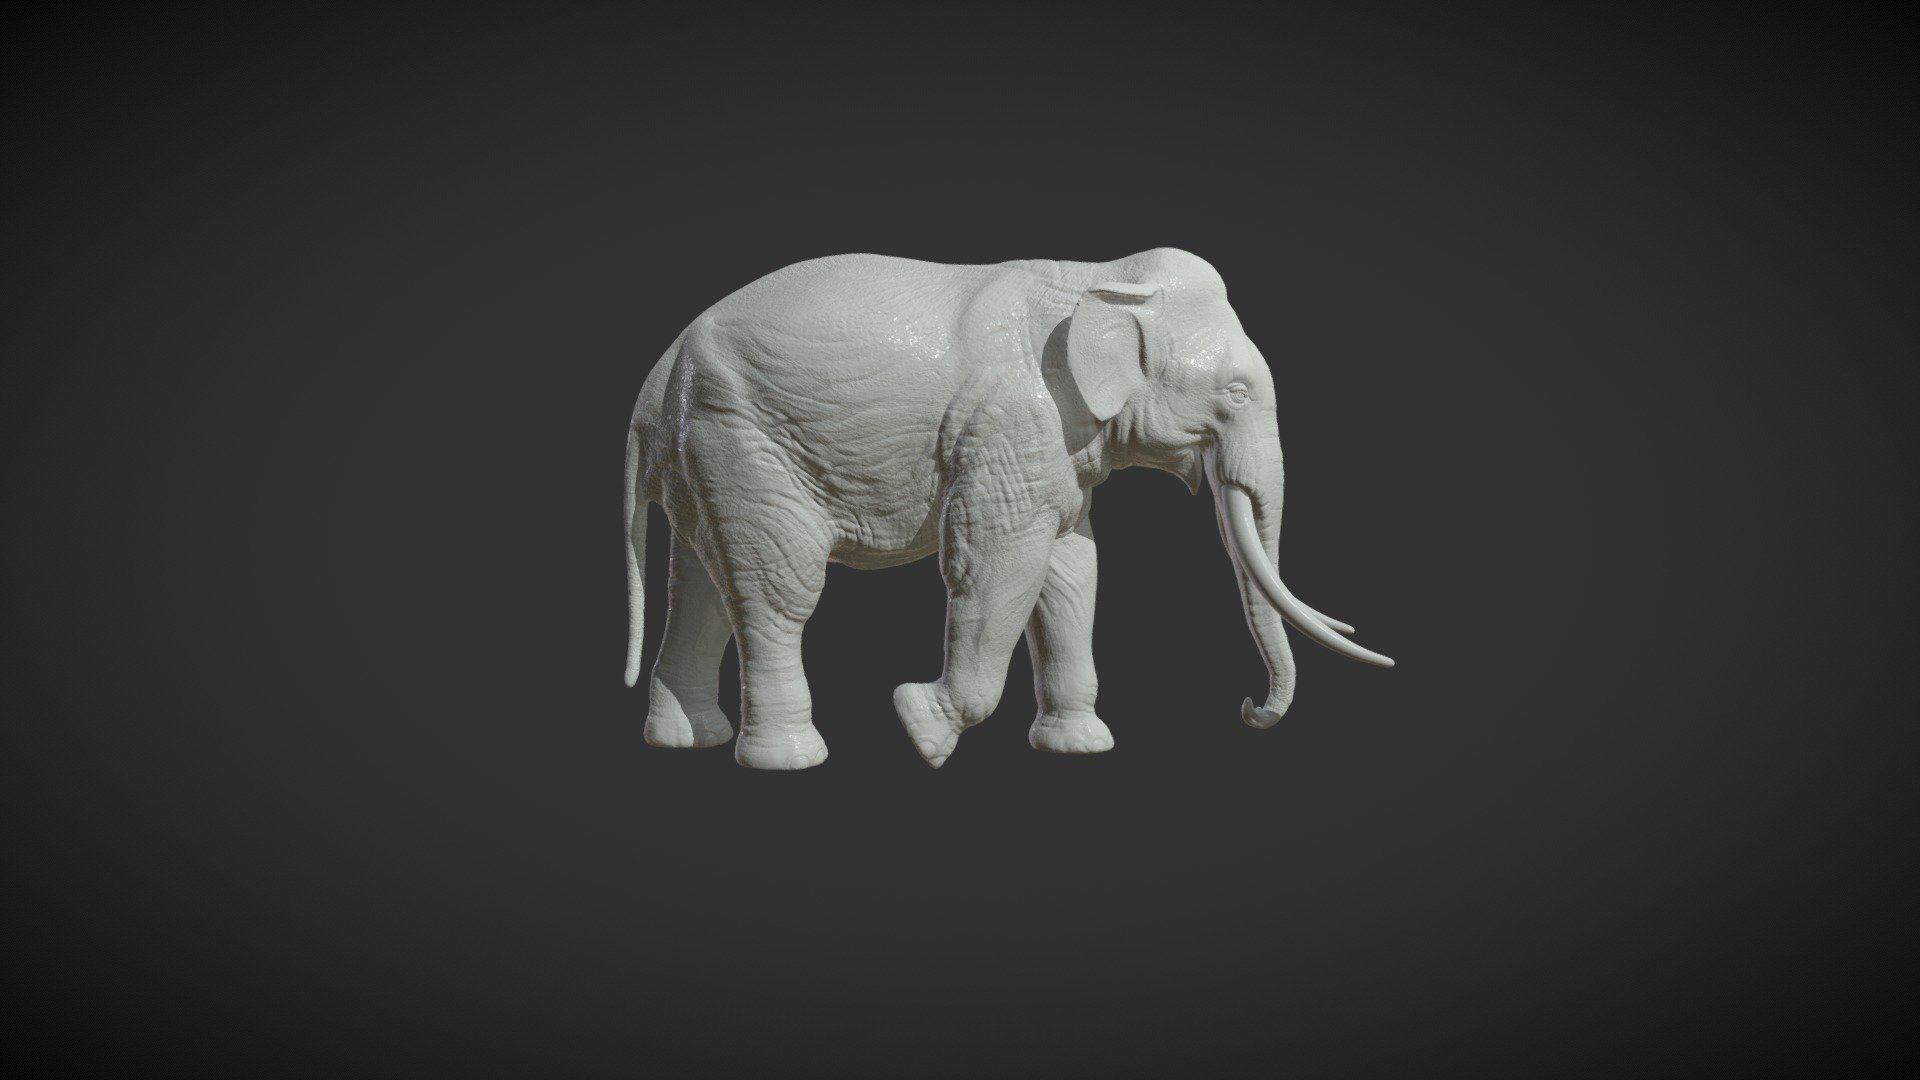 Print ready model of Elephant, can be used for CNC carving.

Measure units are millimeters , it is about 5 cm in height.

Mesh is manifold, no holes, no bad contiguous edges.

Hollow and solid versions of files are available:

1) Elephant_Pose_solid. (.blend, .obj, .3ds, .fbx, .dae) Faces : 742926 (tris) ; volume: 29.75 cm3

2) Elephant_Pose_hollow. (.blend, .obj, .3ds, .fbx, .dae) Faces :  779652 (tris) ; volume: 7.5 cm3

Wall thickness for hollow version is about 1mm. 

Each file contains one objects, no loose parts 3d model